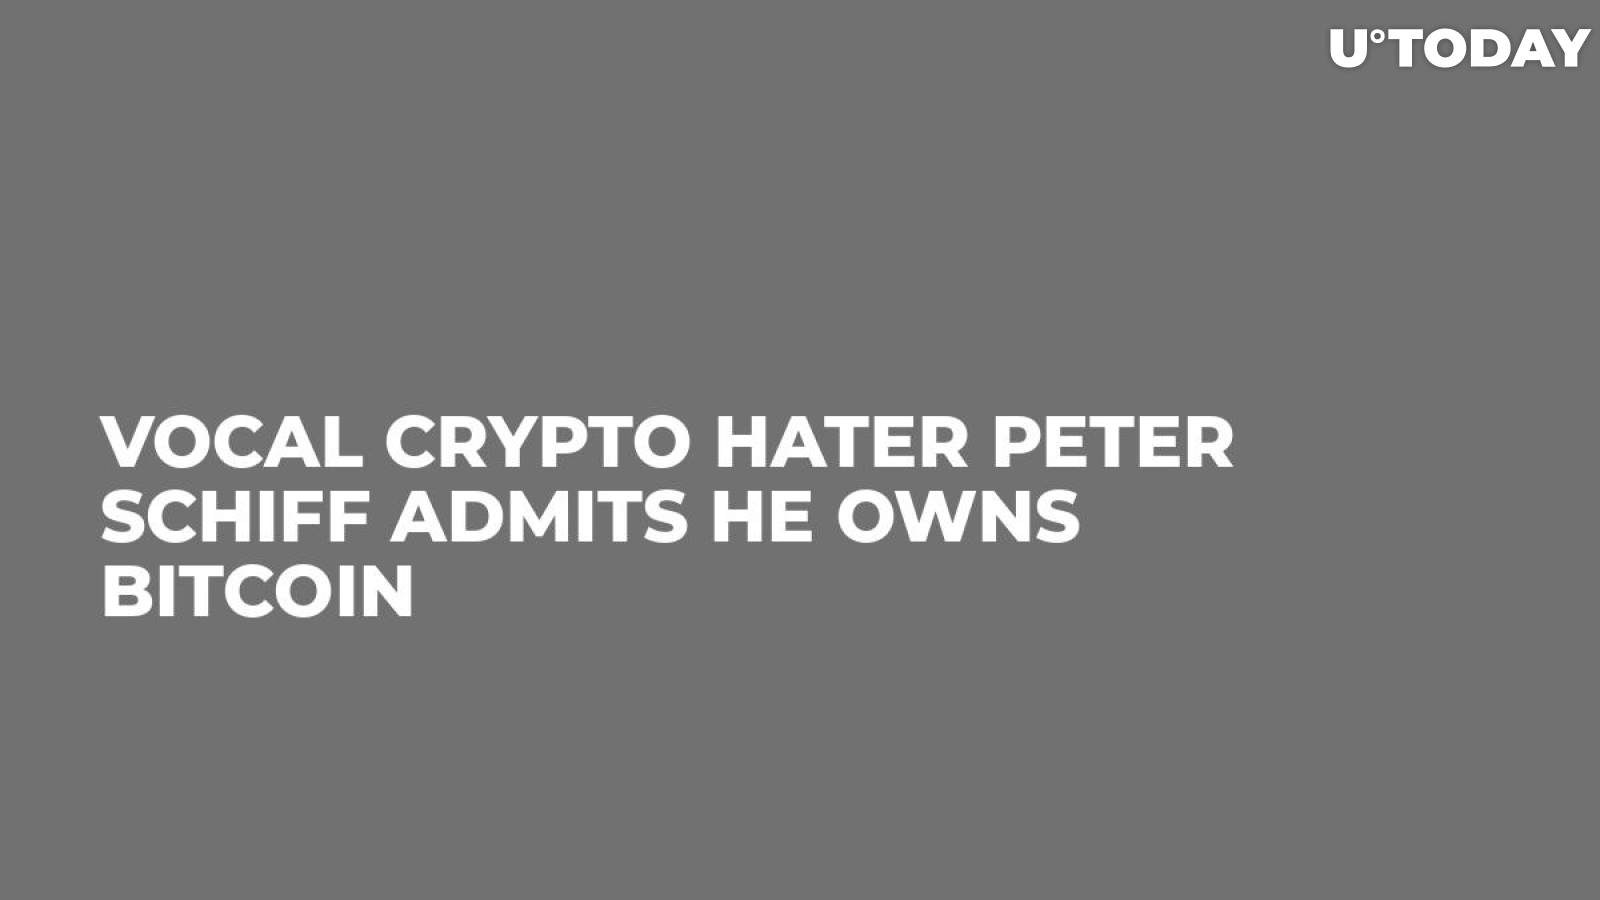 Vocal Crypto Hater Peter Schiff Admits He Owns Bitcoin